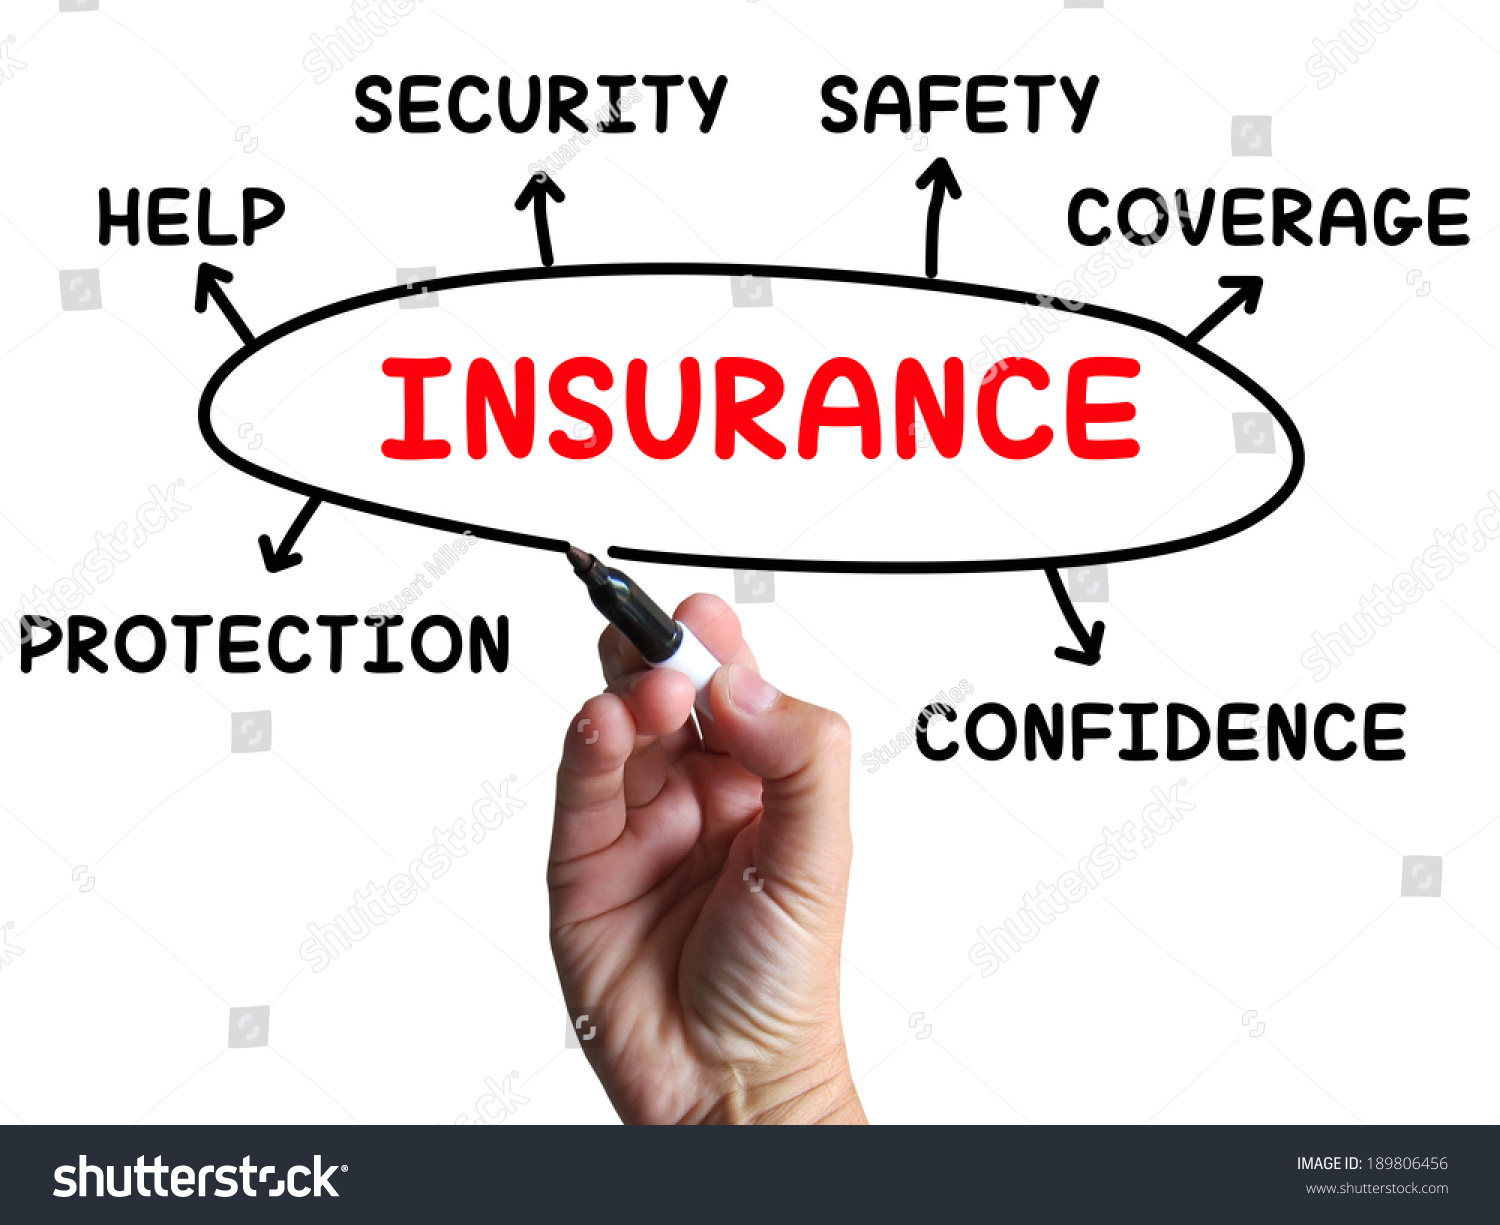 insurance meaning